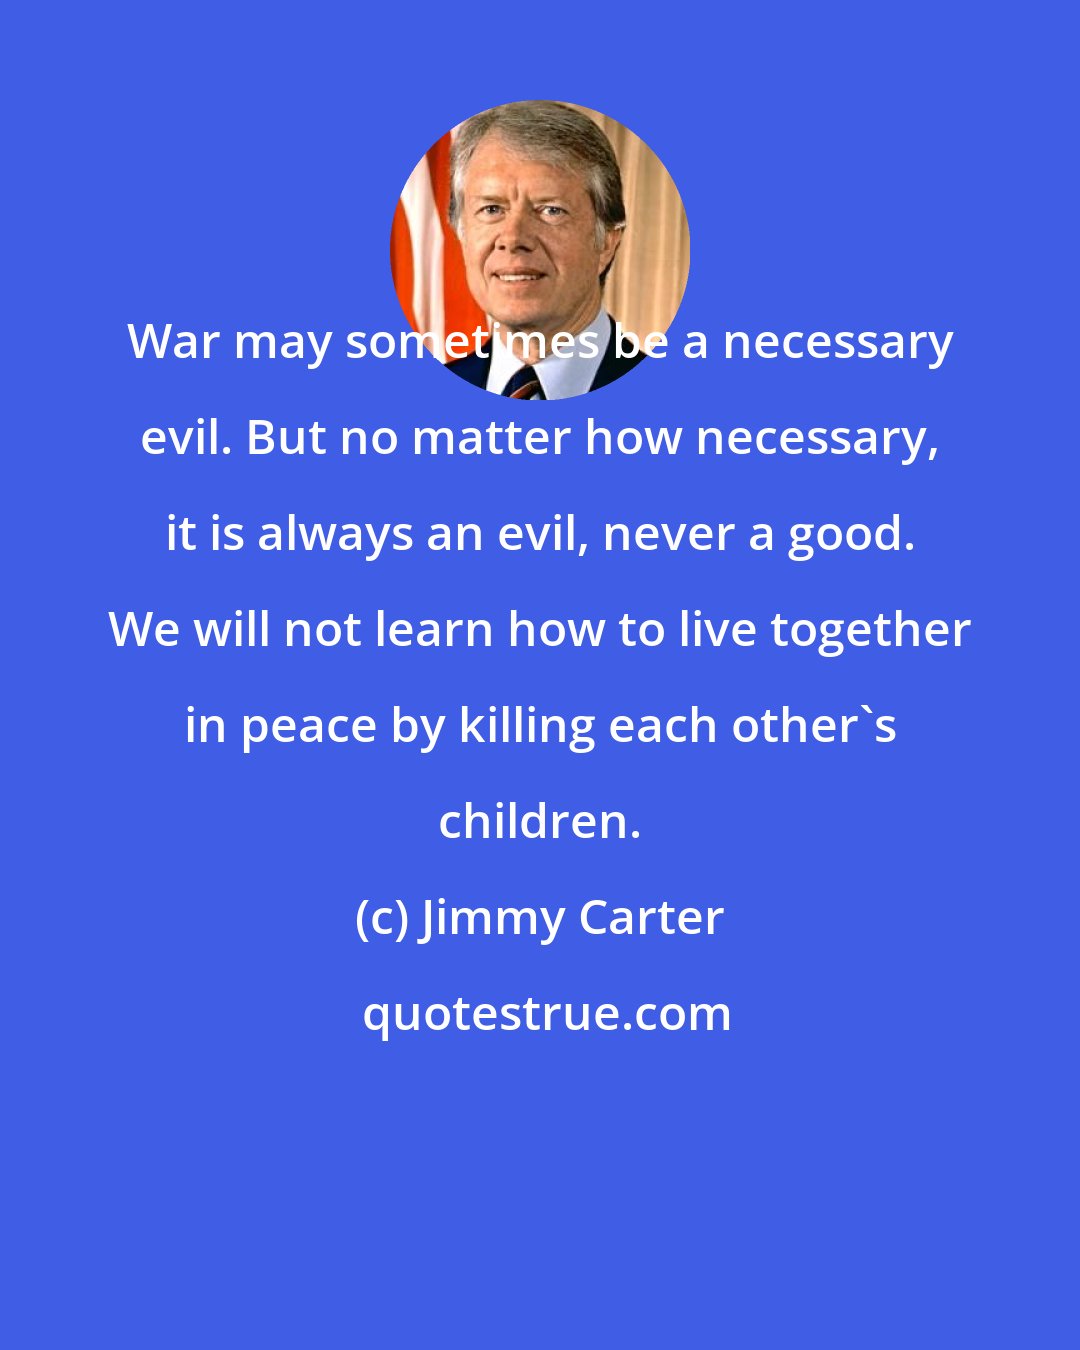 Jimmy Carter: War may sometimes be a necessary evil. But no matter how necessary, it is always an evil, never a good. We will not learn how to live together in peace by killing each other's children.